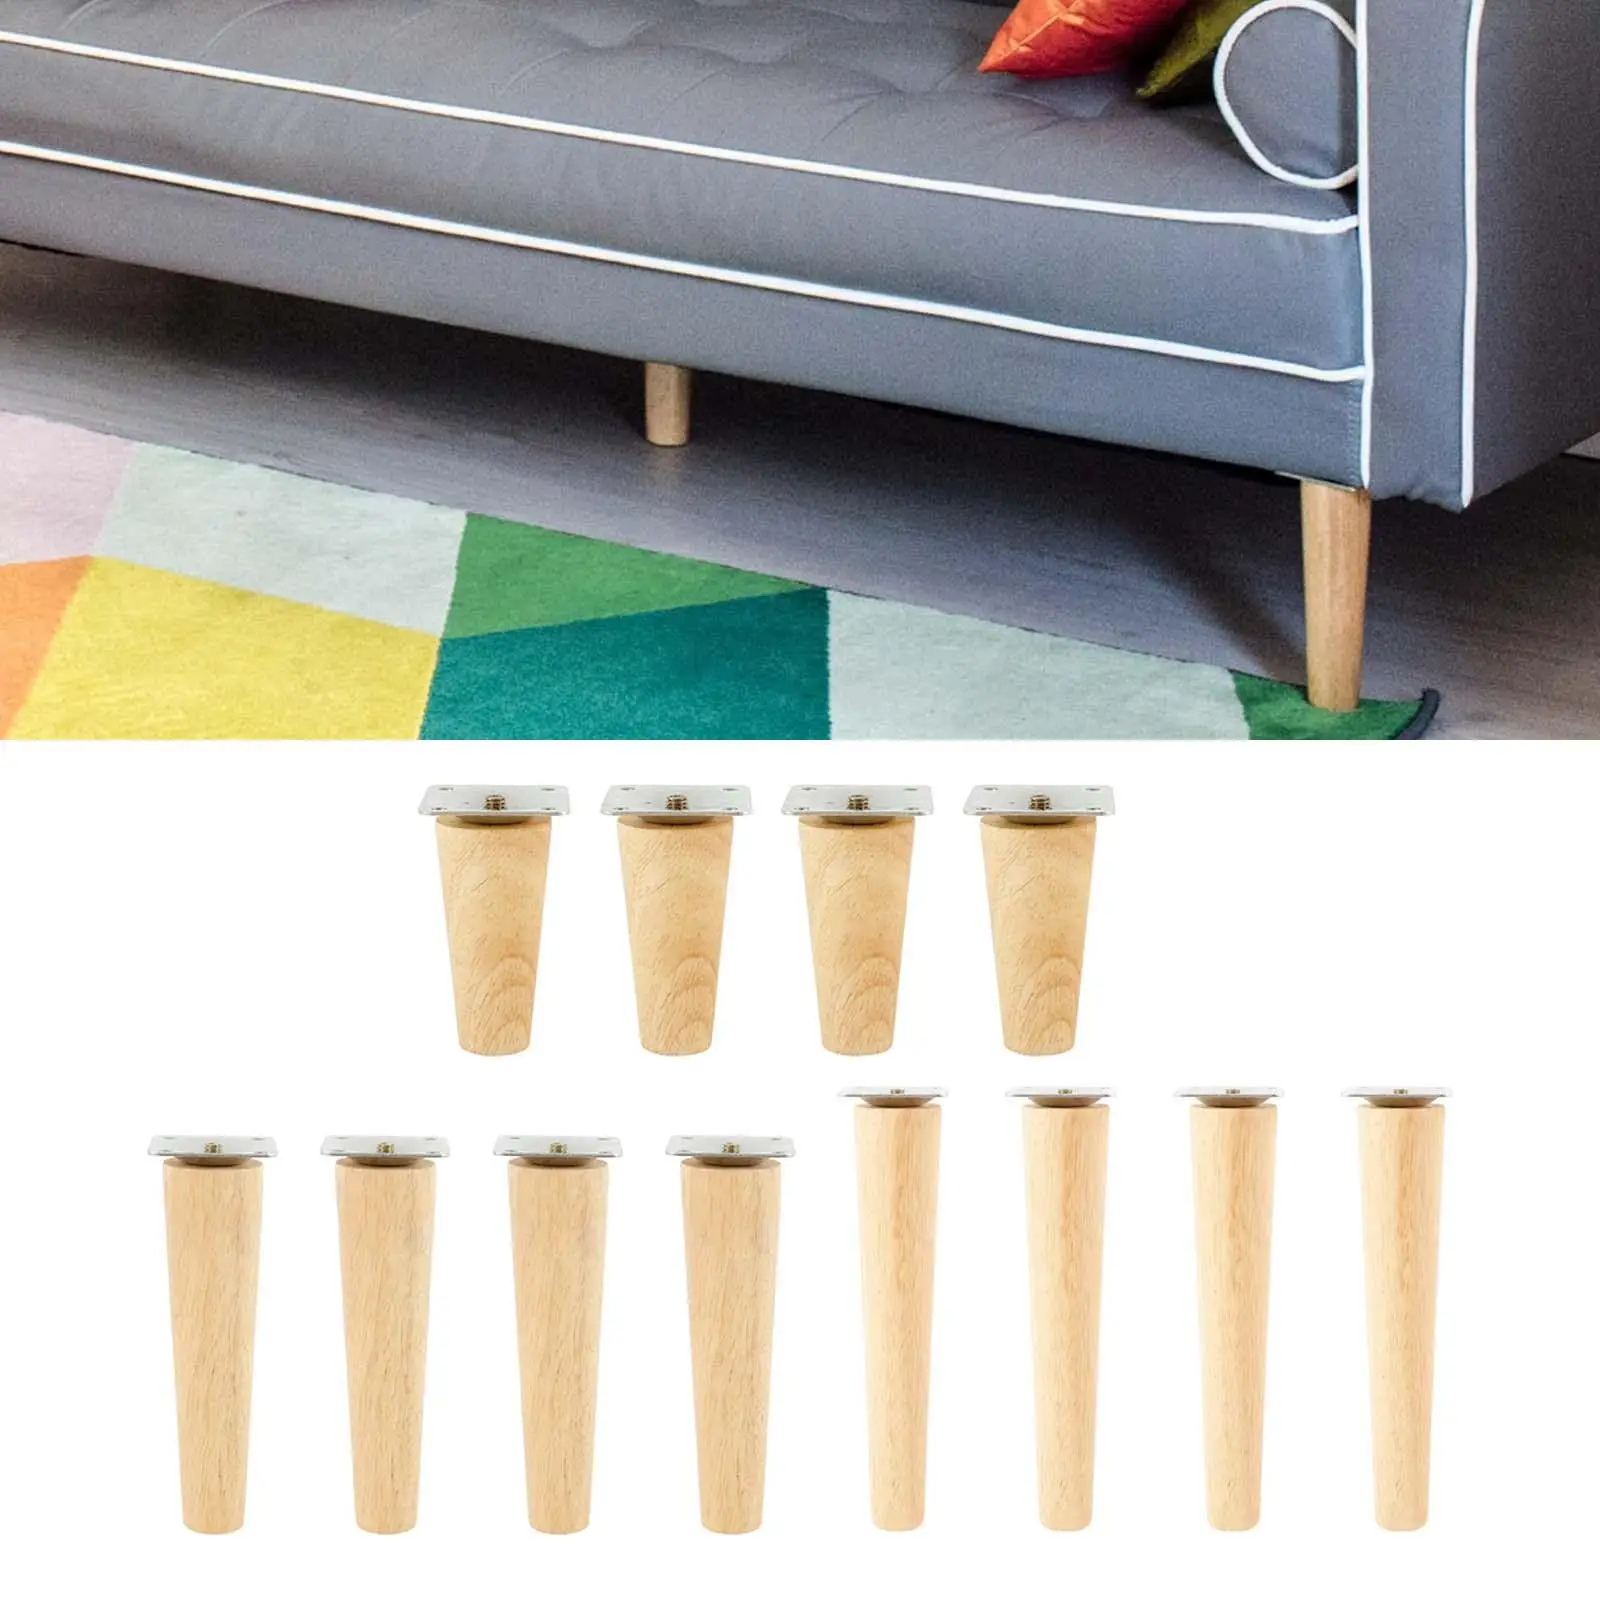 4 Pieces Wooden Furniture Leg Fashion Lightweight Multipurpose Sturdy Chair Legs DIY for Chair Table Cupboard Shelves Couch